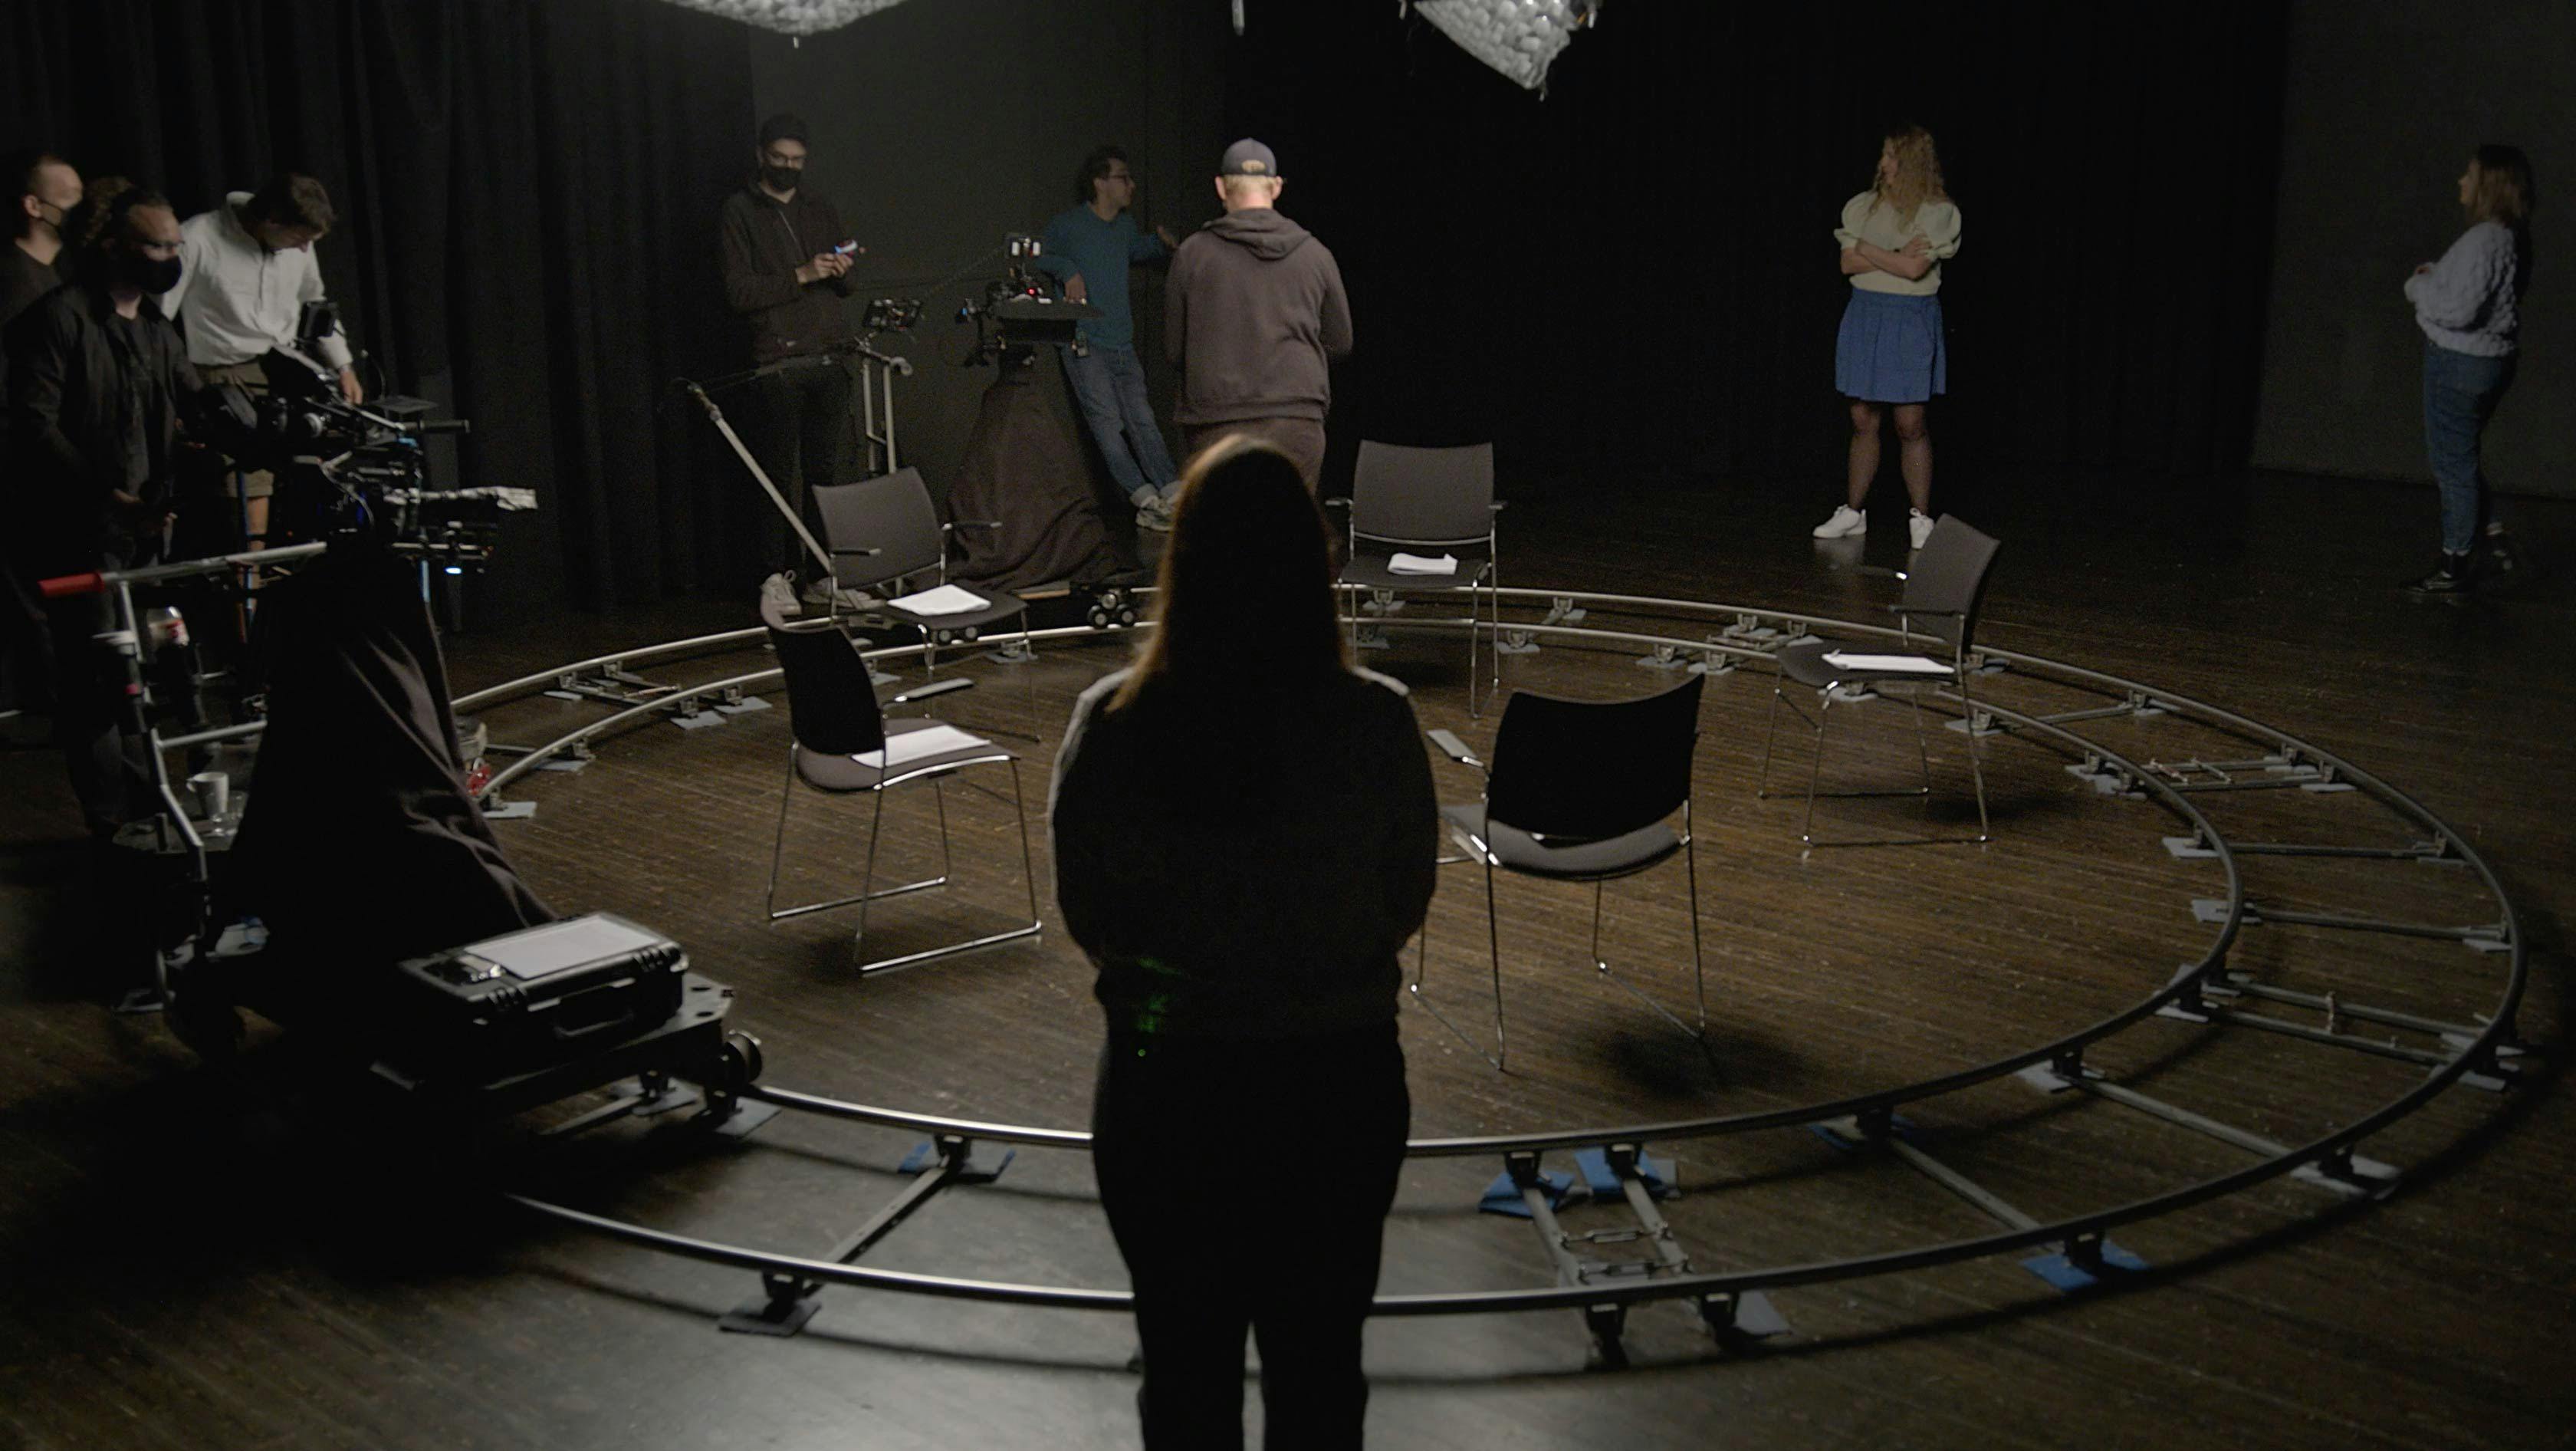 People stand around in a theatre blackbox. A camera track encircles 5 chairs set in a circle